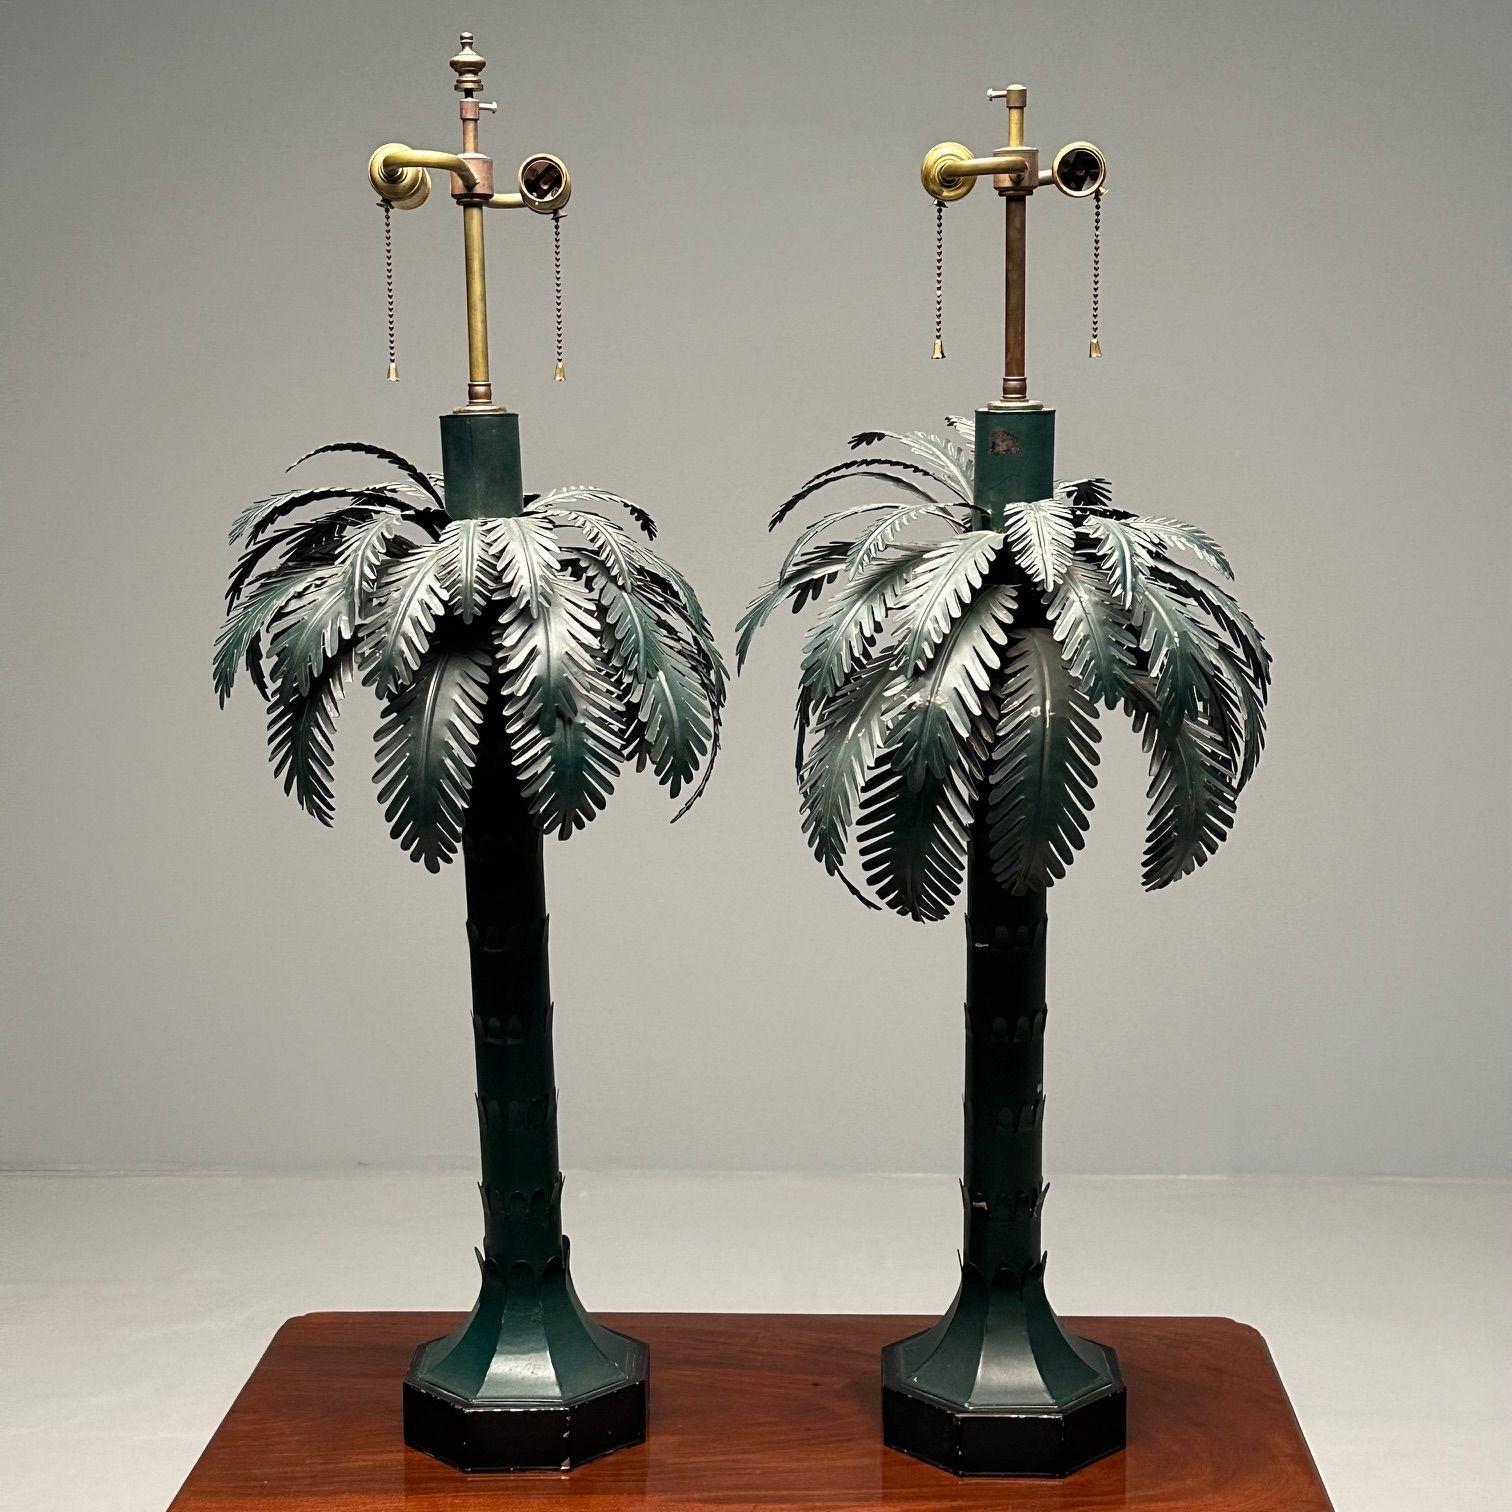 Maison Jansen Style, Mid-Century Modern, Palm Tree Lamps, Green, Metal, 1970s For Sale 2